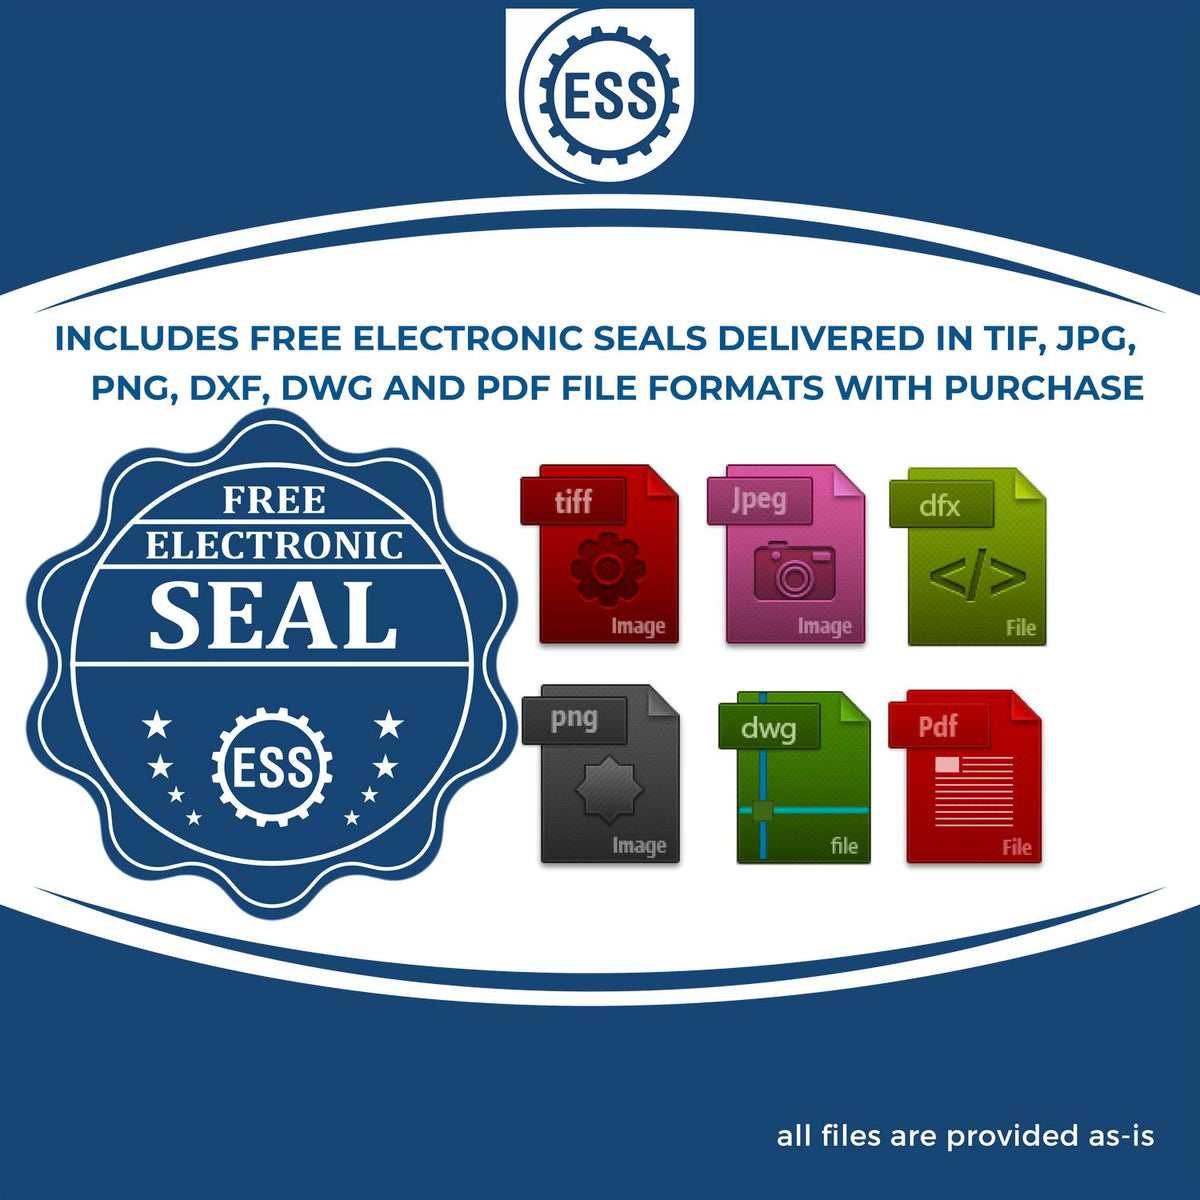 An infographic for the free electronic seal for the Self-Inking State Seal Alabama Notary Stamp illustrating the different file type icons such as DXF, DWG, TIF, JPG and PNG.